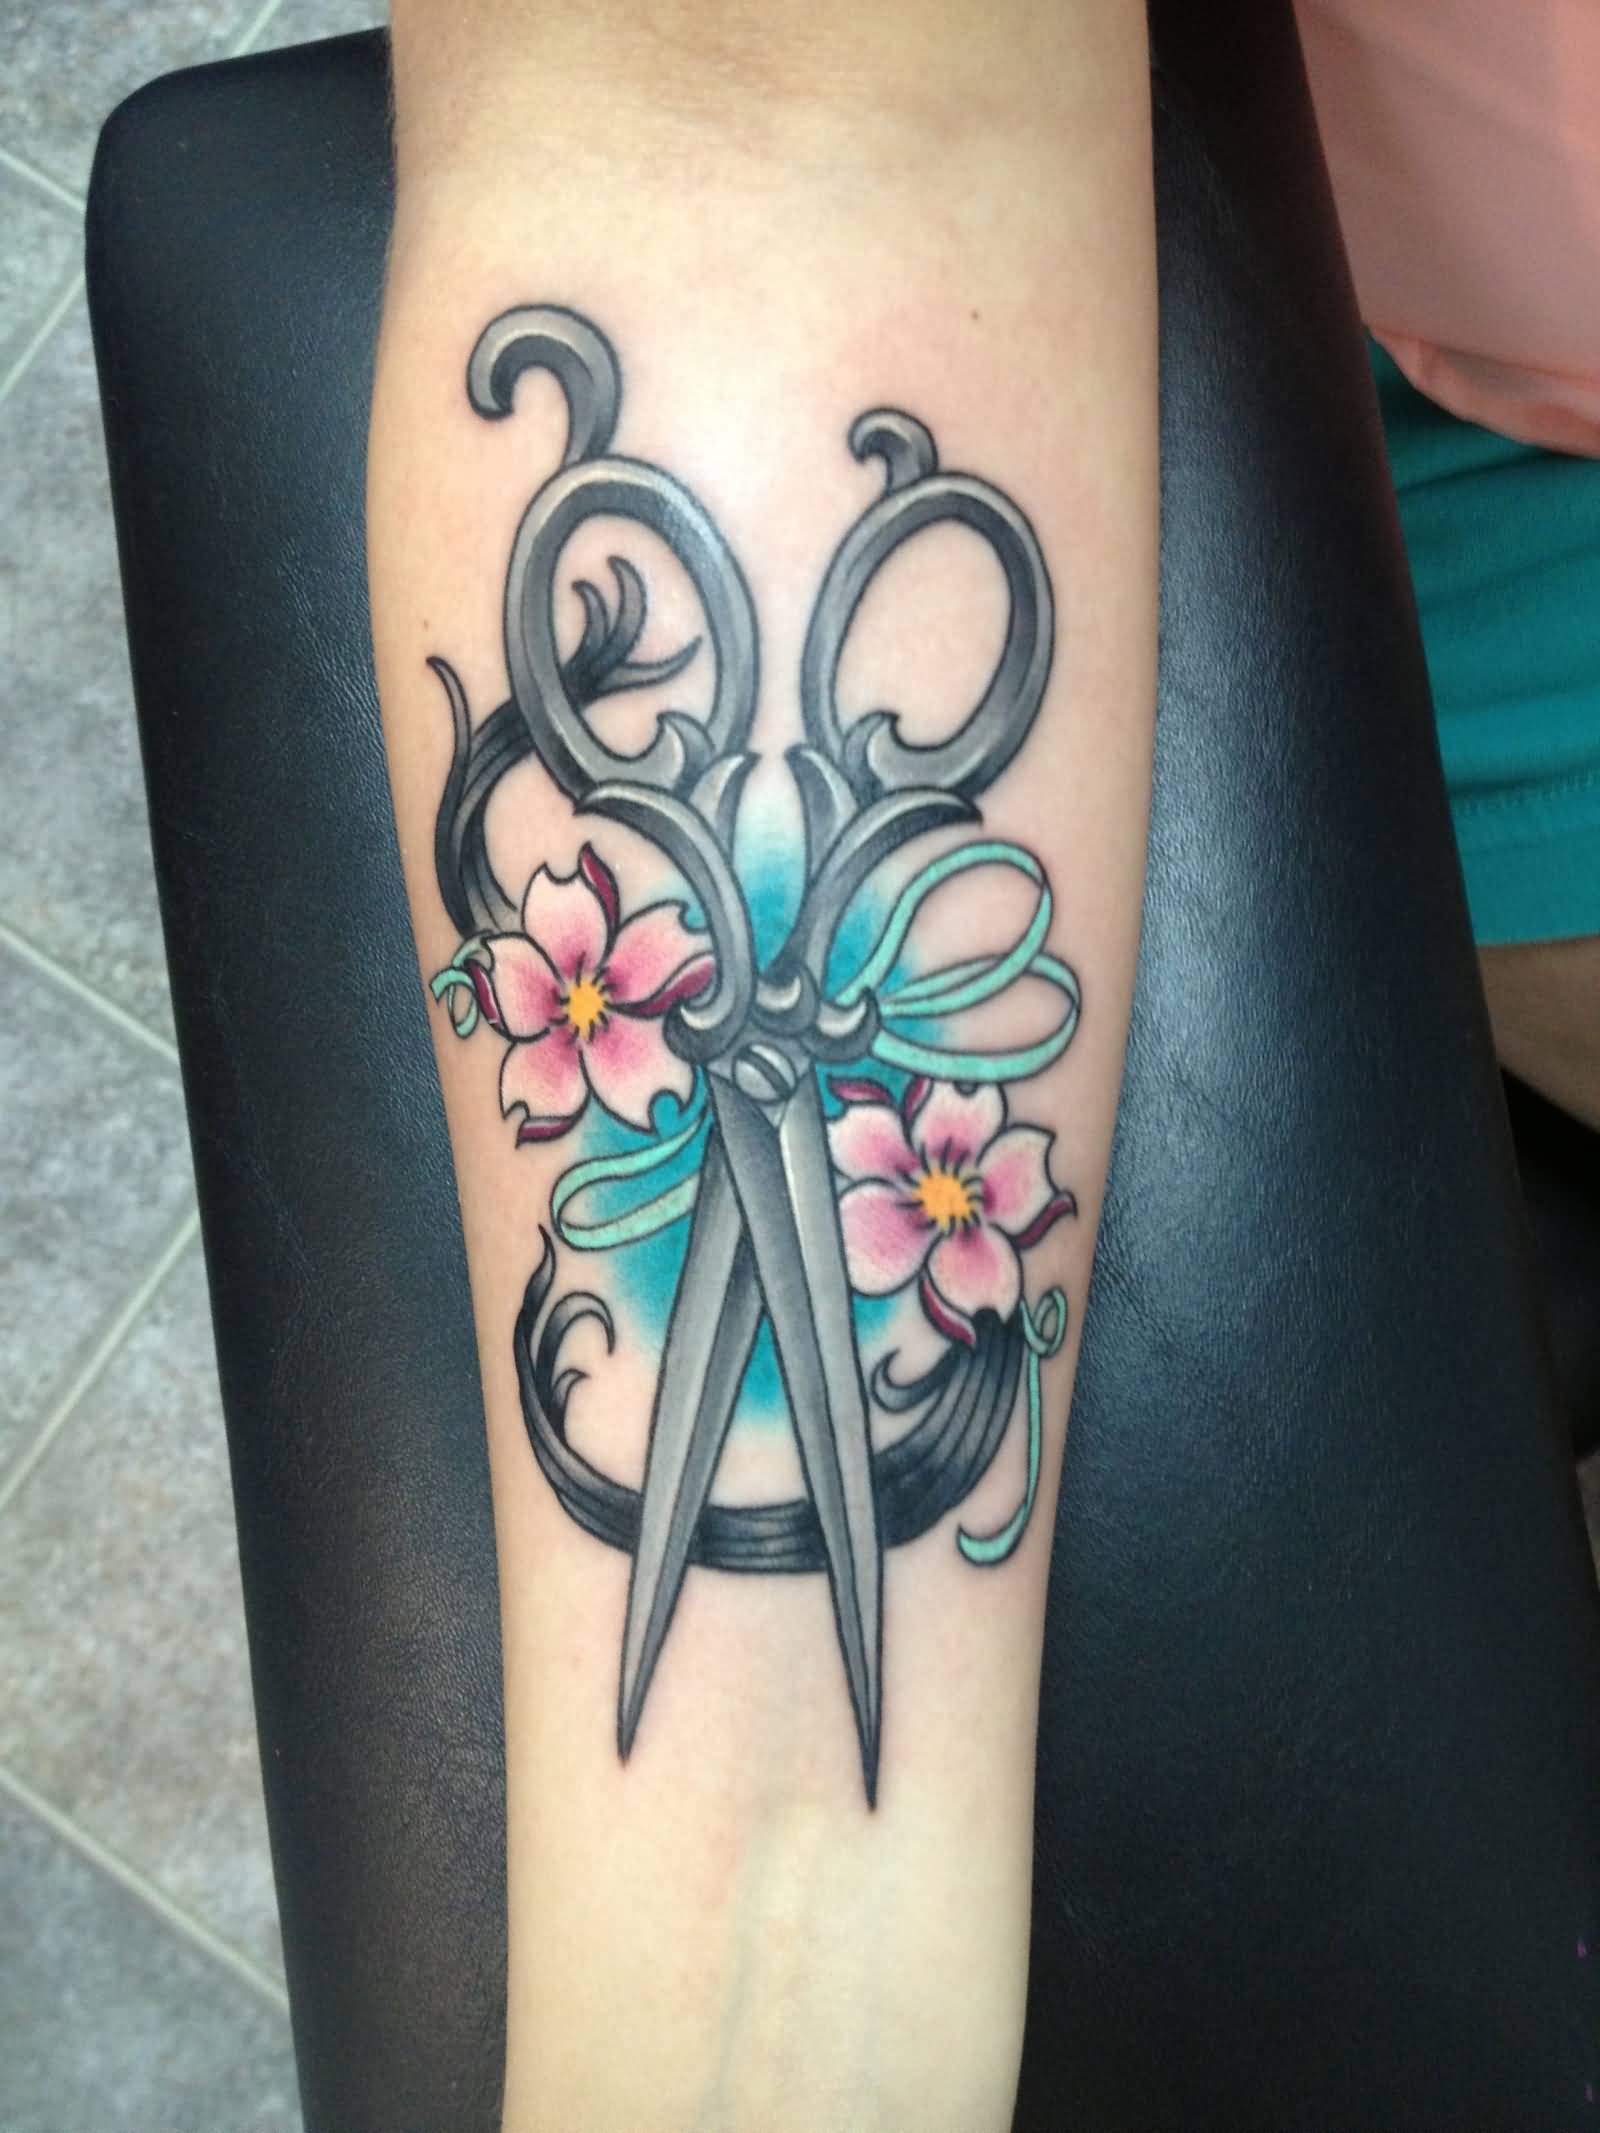 Hair Comb With Flowers And Hair Tattoo On Forearm